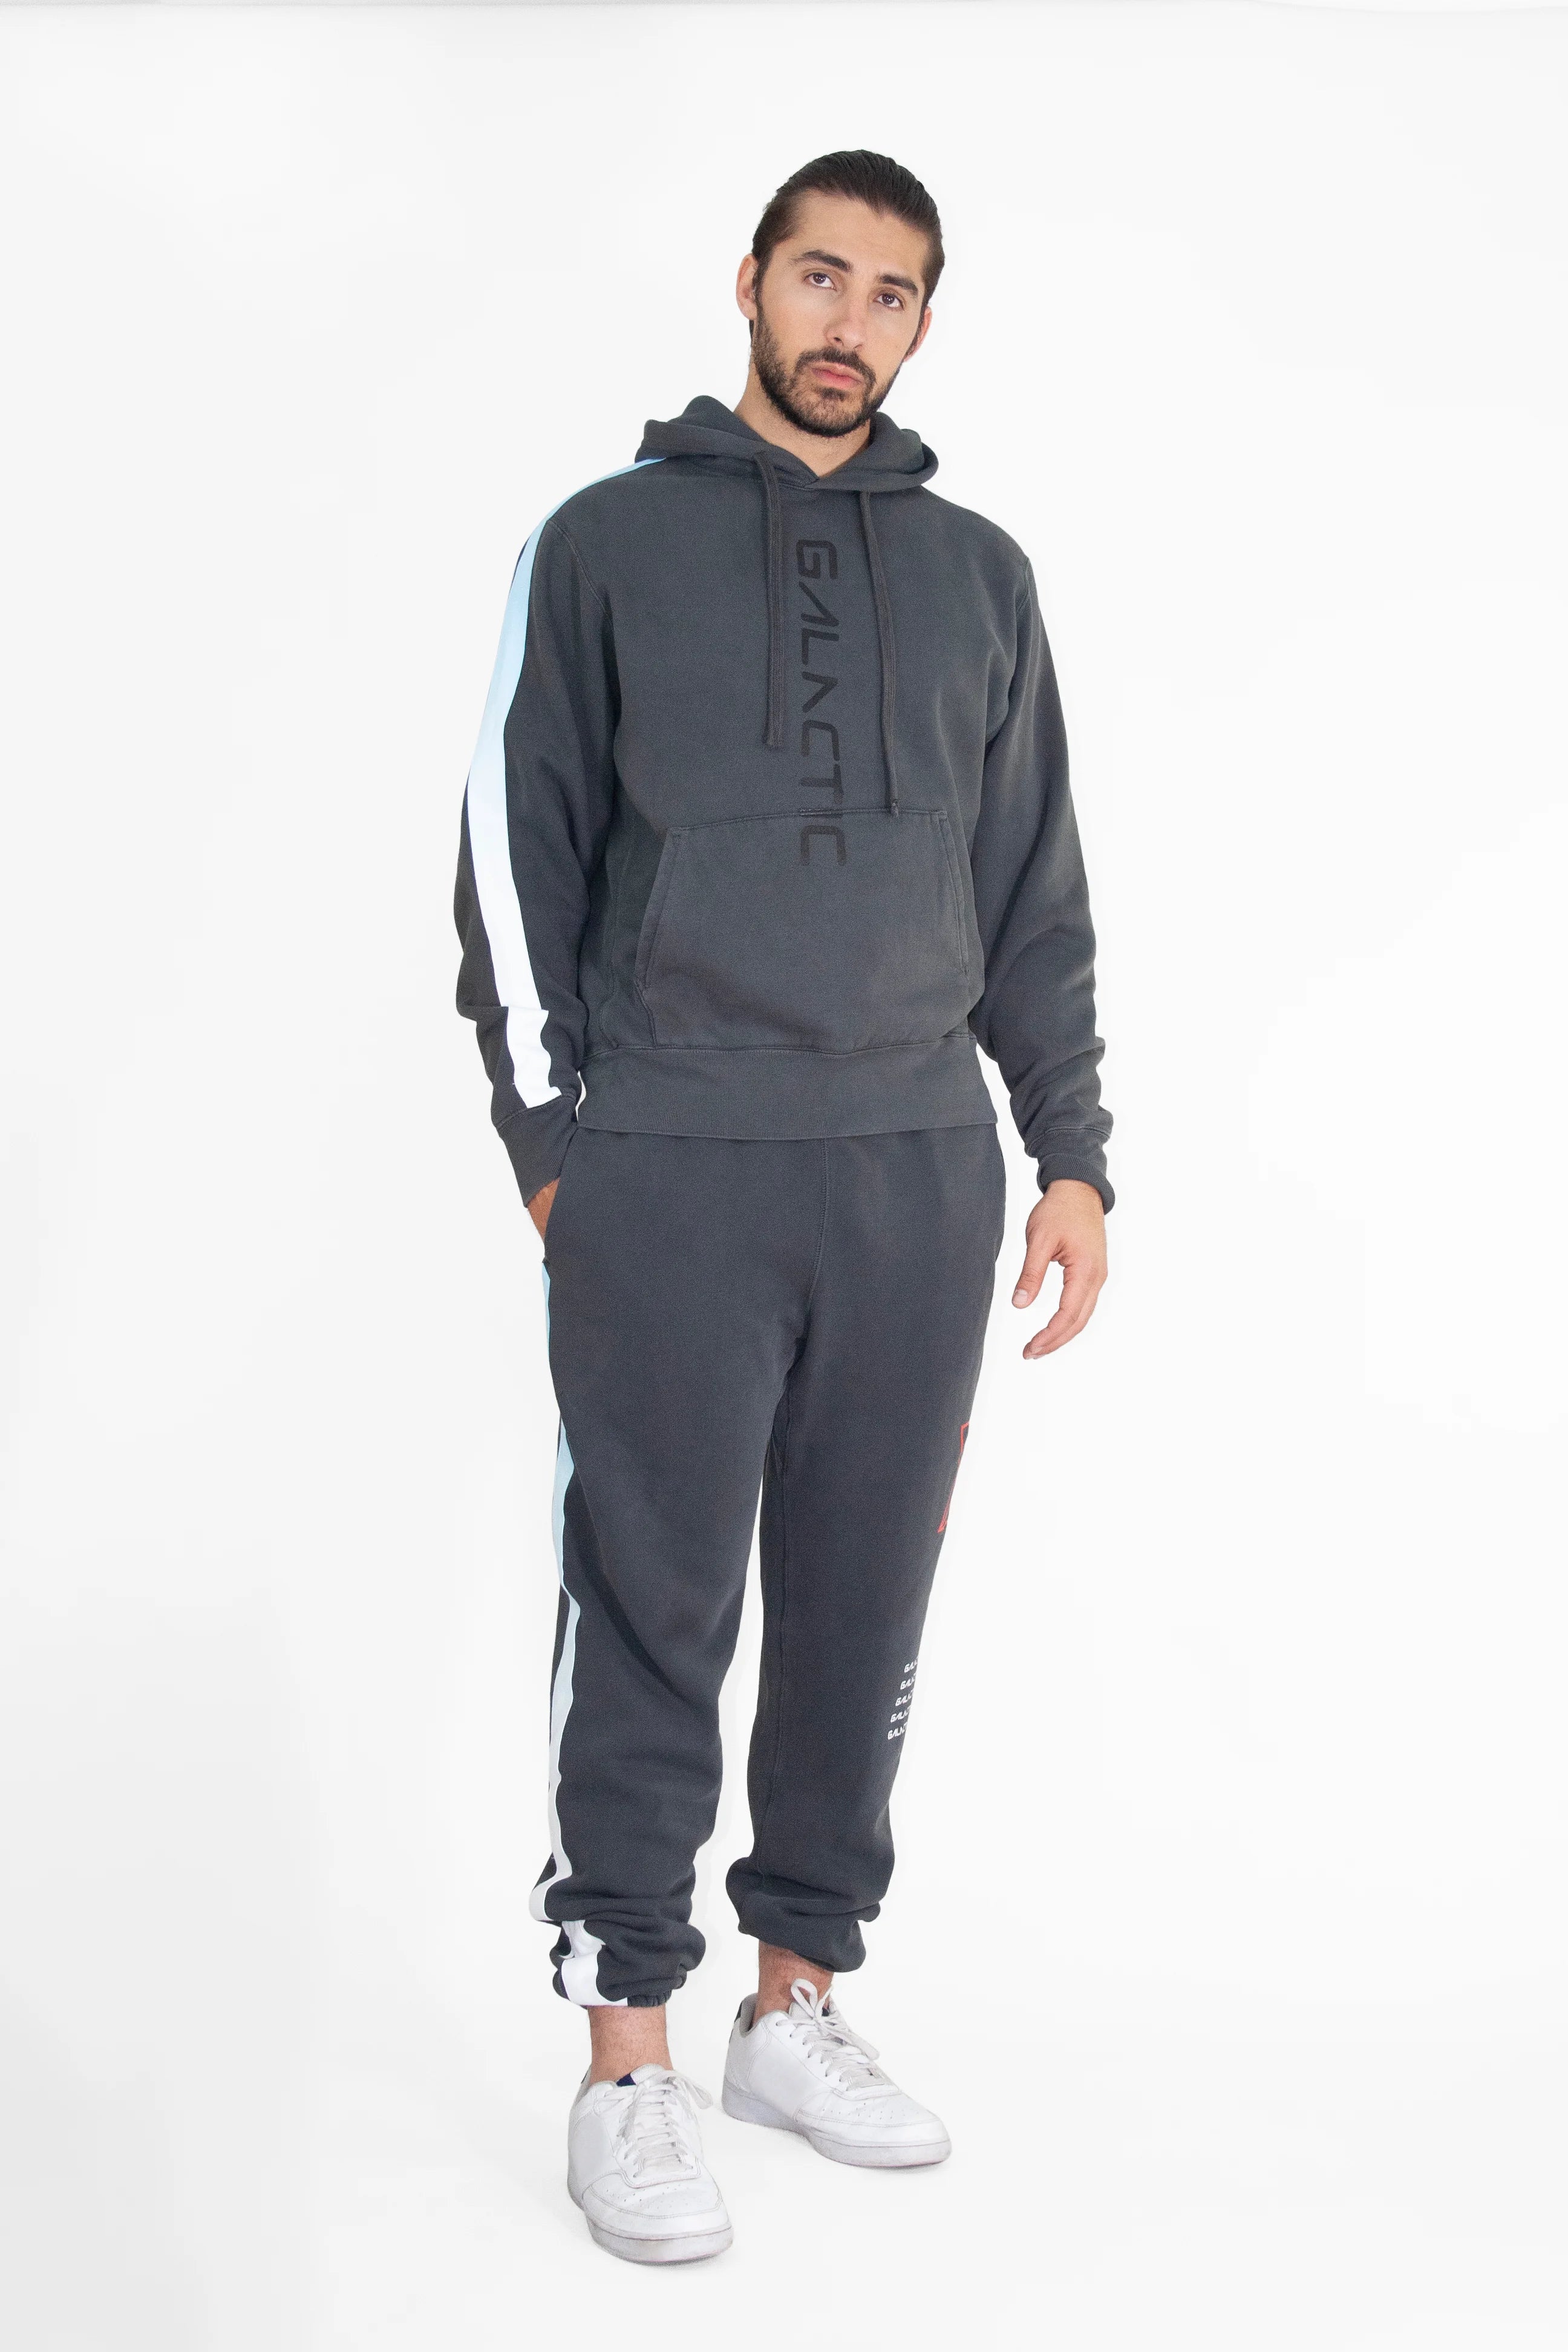 A man wearing a HYPERGALACTIC HOODIE IN SPACE GLOW hoodie and joggers from GFLApparel.